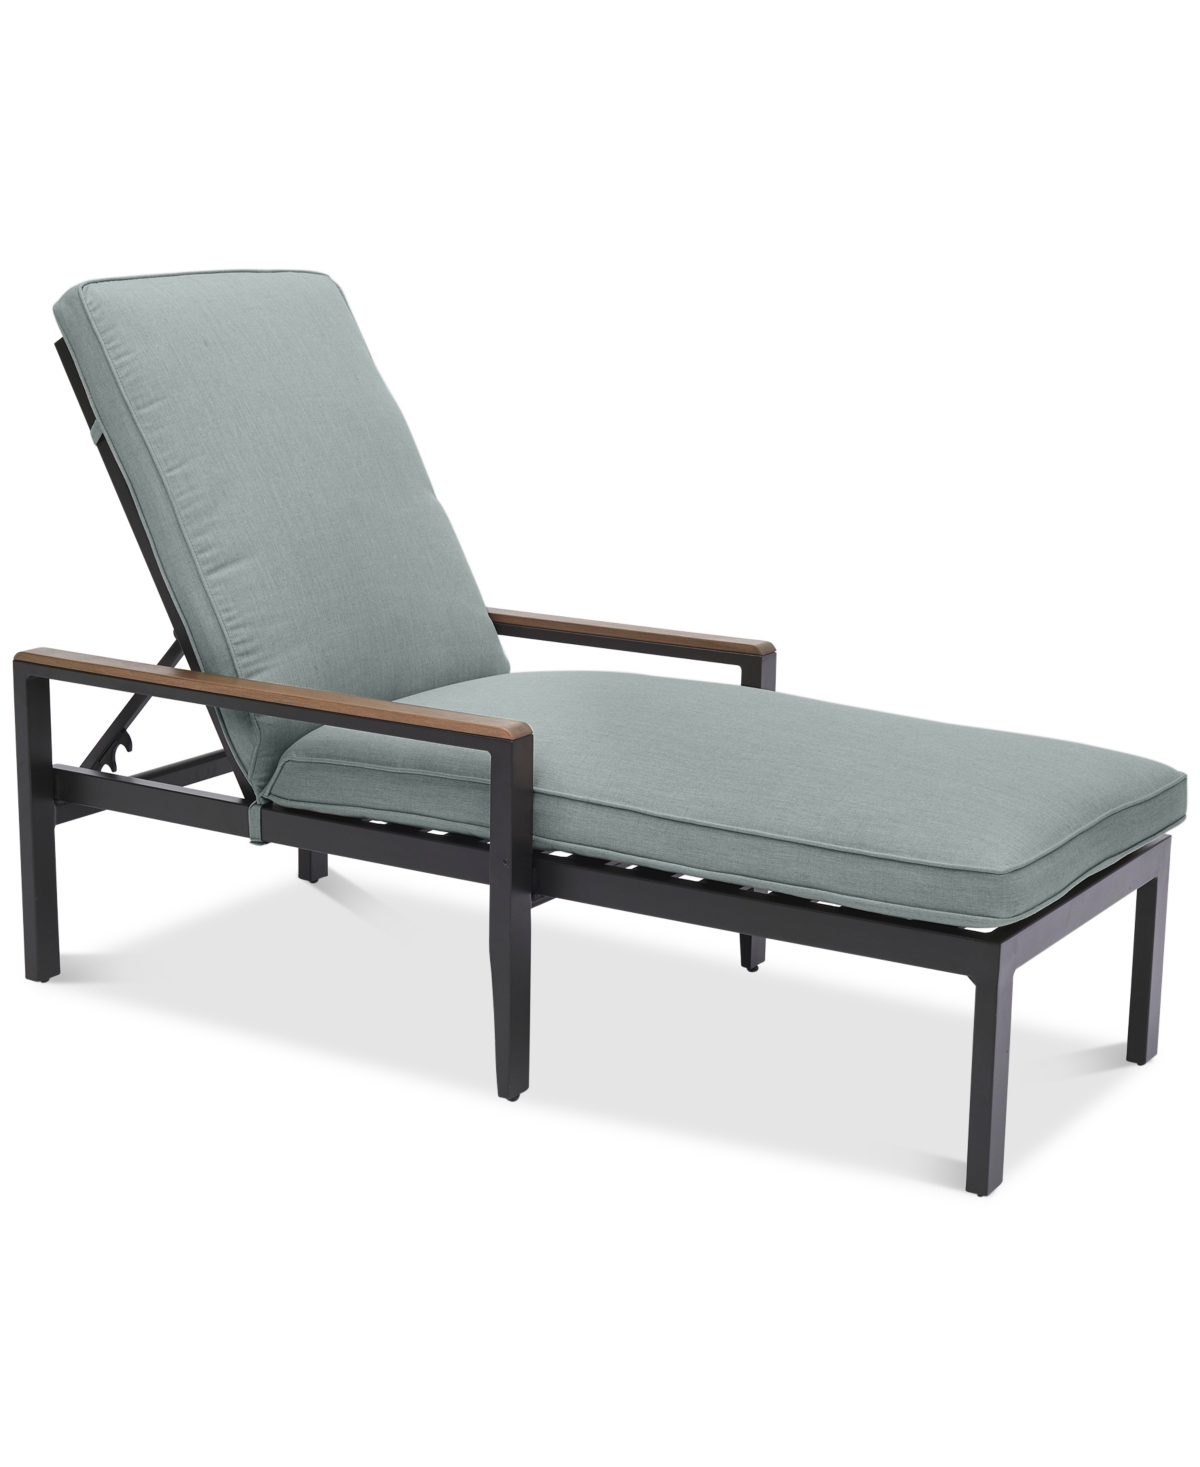 Stockholm Outdoor Chaise Lounge with Outdoor Cushion, Created for Macys